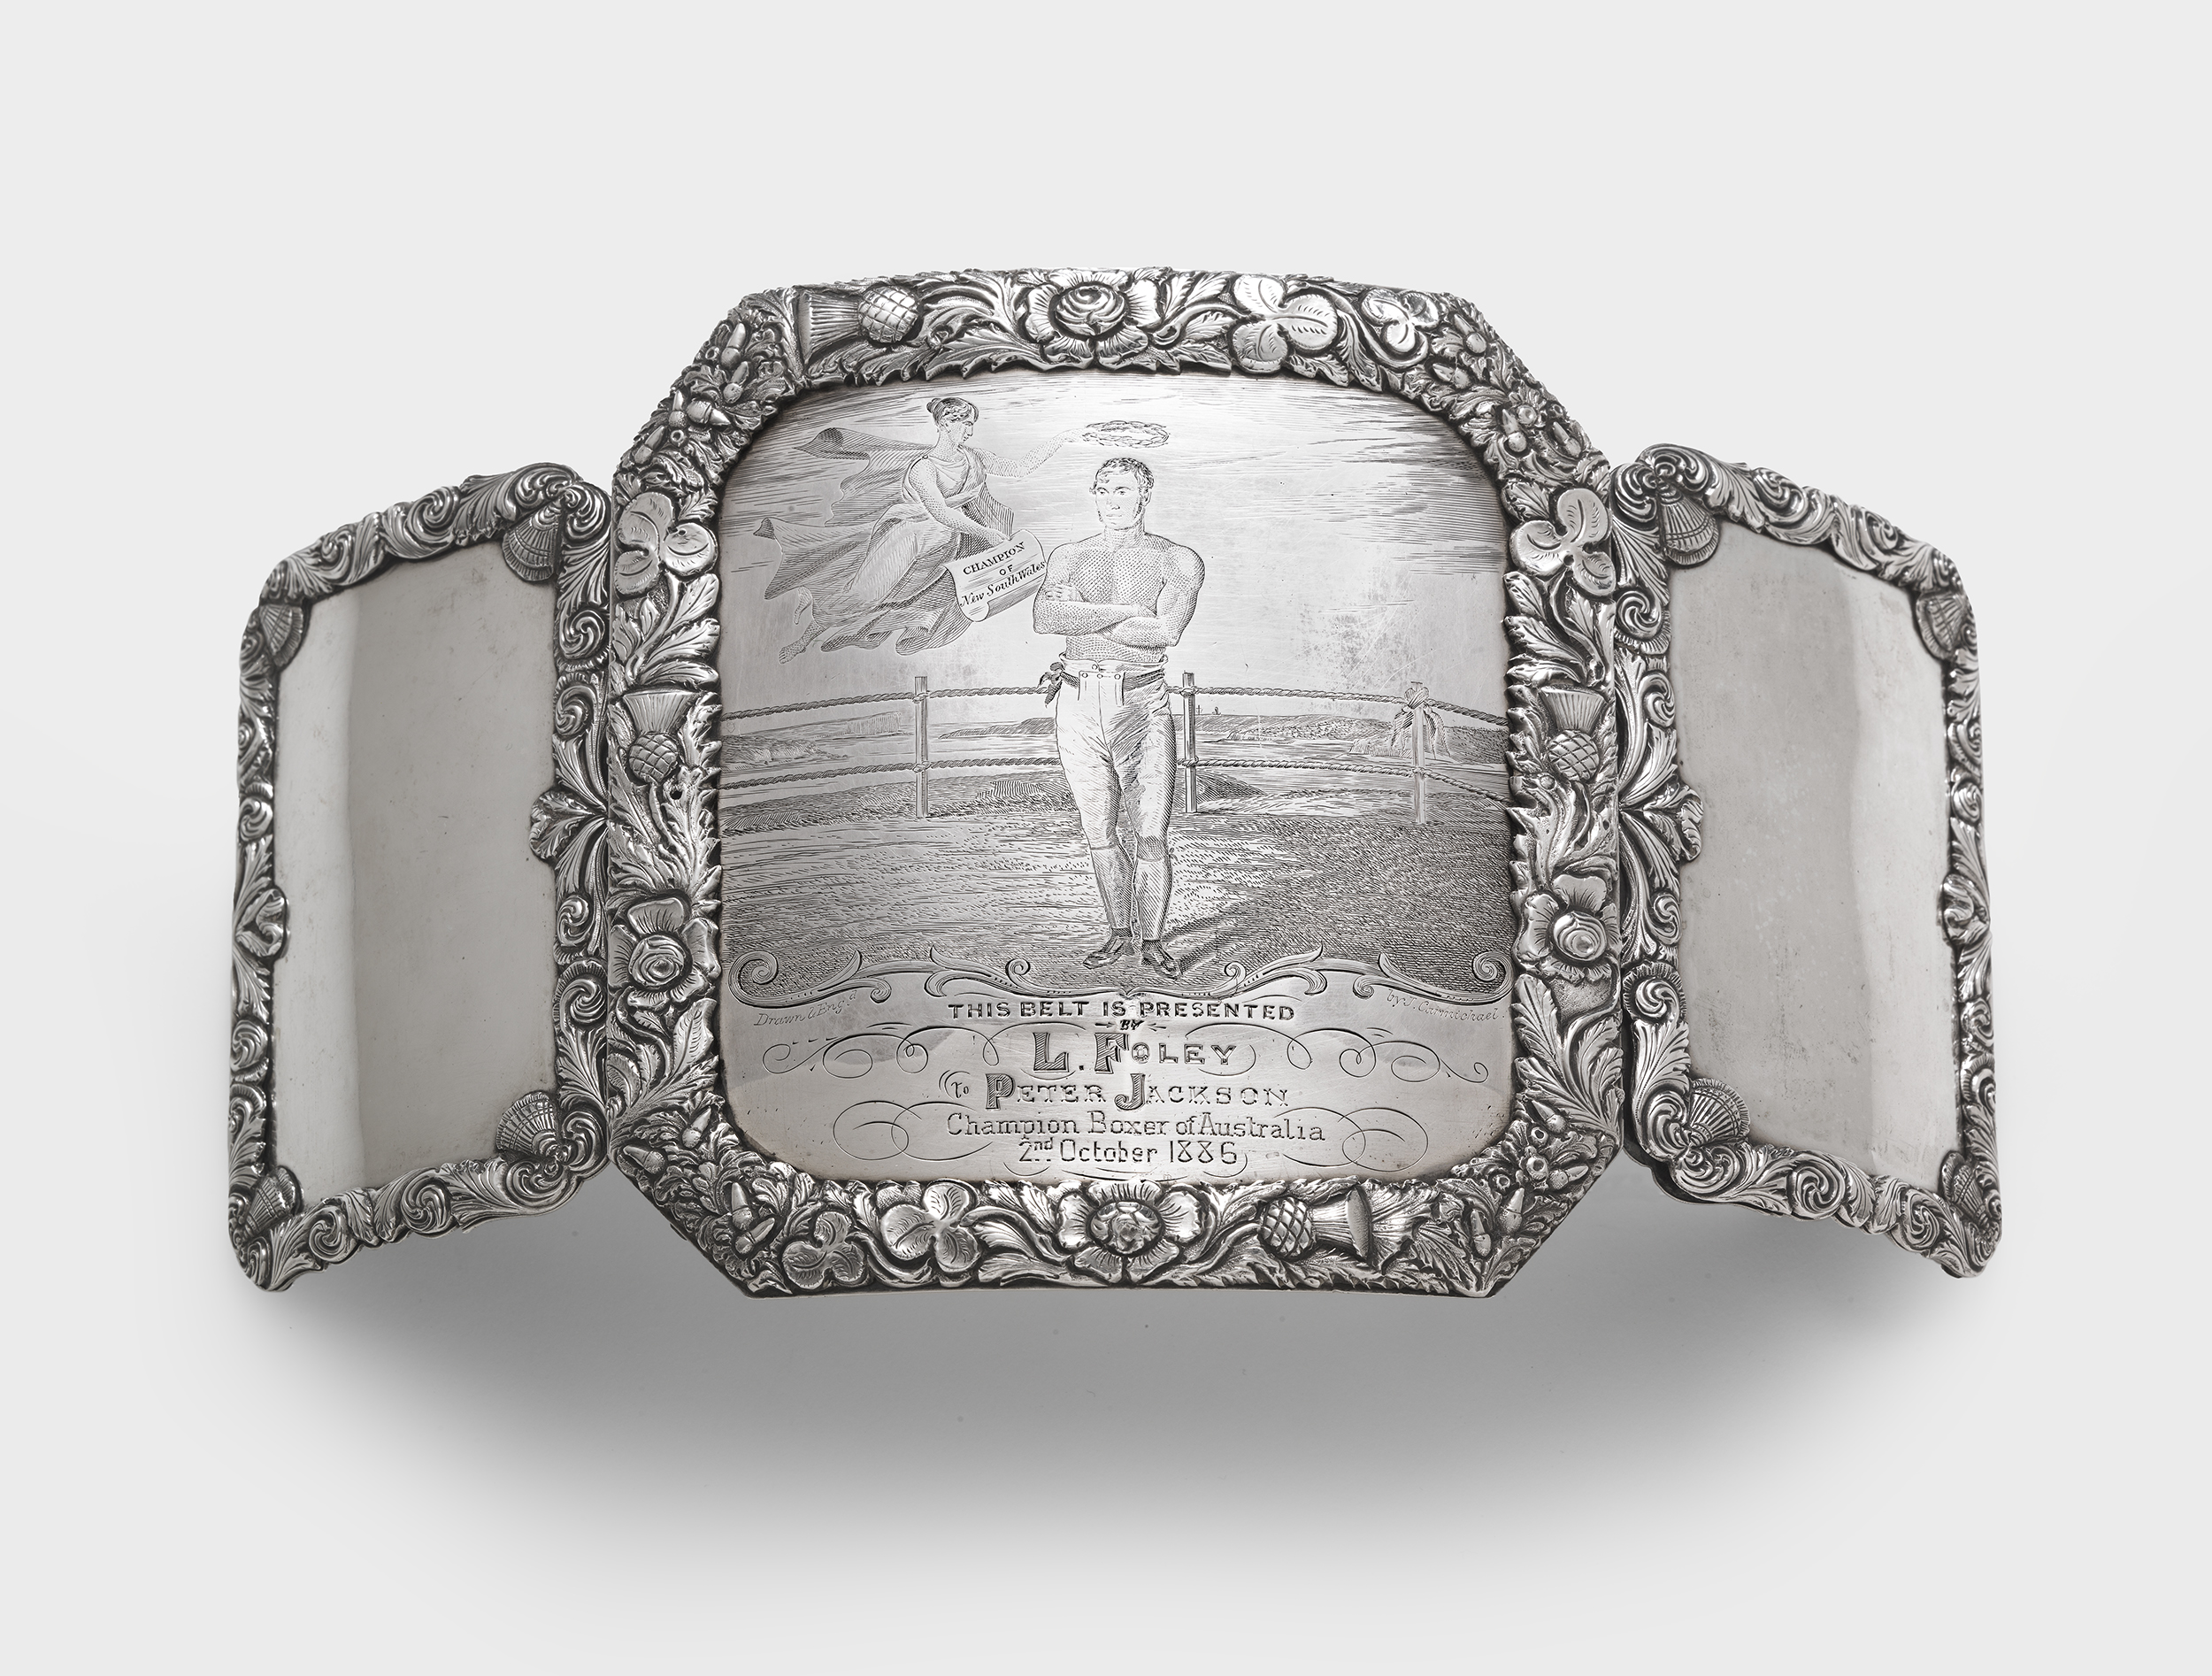   John Cohen  (silversmith) and  John Carmichael  (engraver). Presentation champion's boxing belt buckle 1839-1847 sterling silver: fabricated, stamped, repousséed, chased, engraved. &nbsp;National Gallery of Australia, Canberra. &nbsp;Purchased 2014